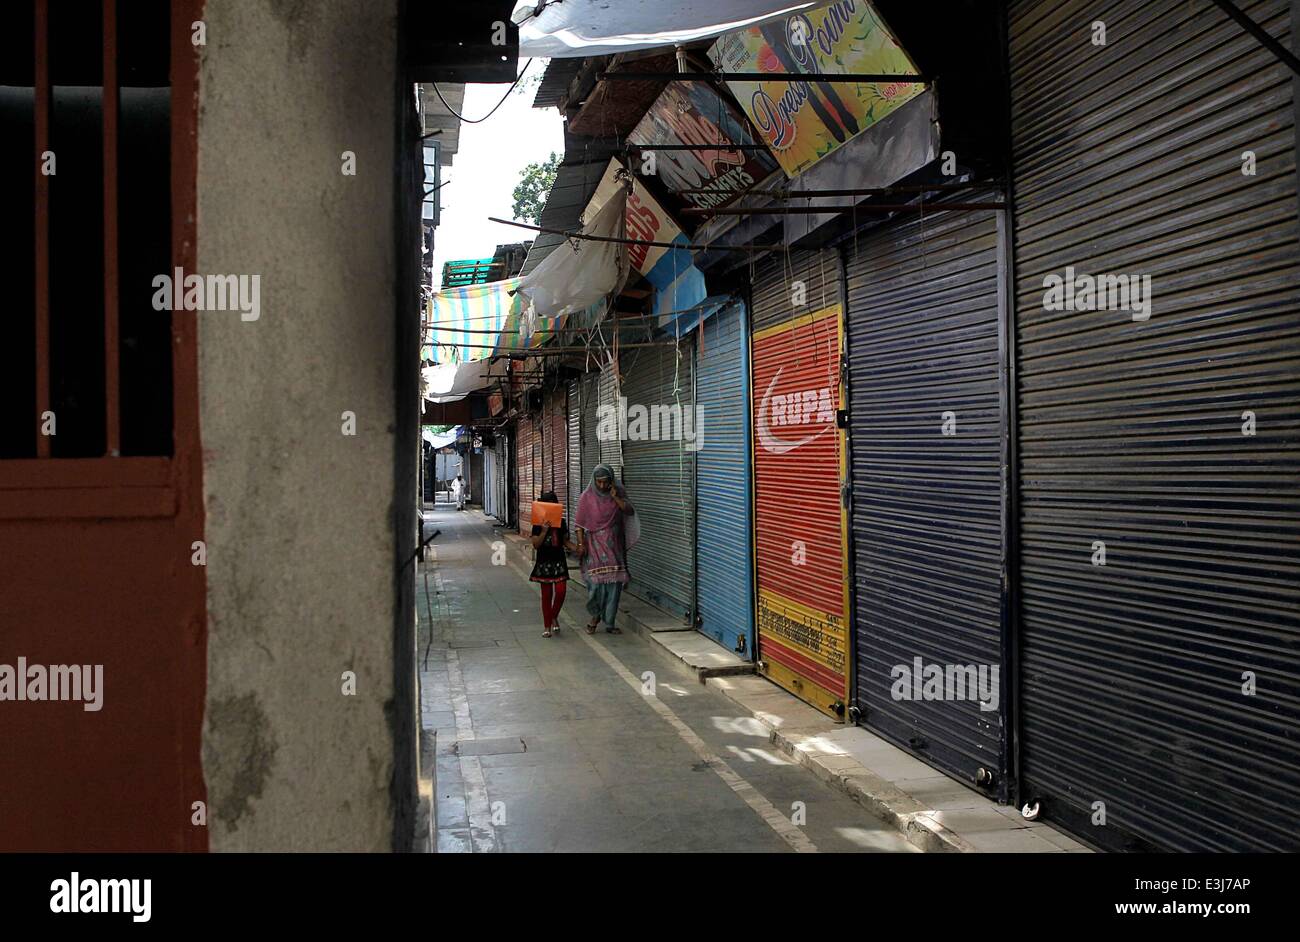 (140624) -- SRINAGAR, June 24, 2014 (Xinhua) -- A Kashmiri woman walks along with her daughter through a closed market during a strike in Srinagar, the summer capital of Indian-controlled Kashmir, June 24, 2104. Normal life in Muslim majority areas of Indian-controlled Kashmir including Srinagar city was affected Tuesday due to a separatist shutdown. The shutdown call was given by region's Separatist group to protest the killing of a youth when Indian troops fired at protesters on Monday. The protests broke out at Krank Shivan in Sopore town, about 54 km northwest of Srinagar city following th Stock Photo